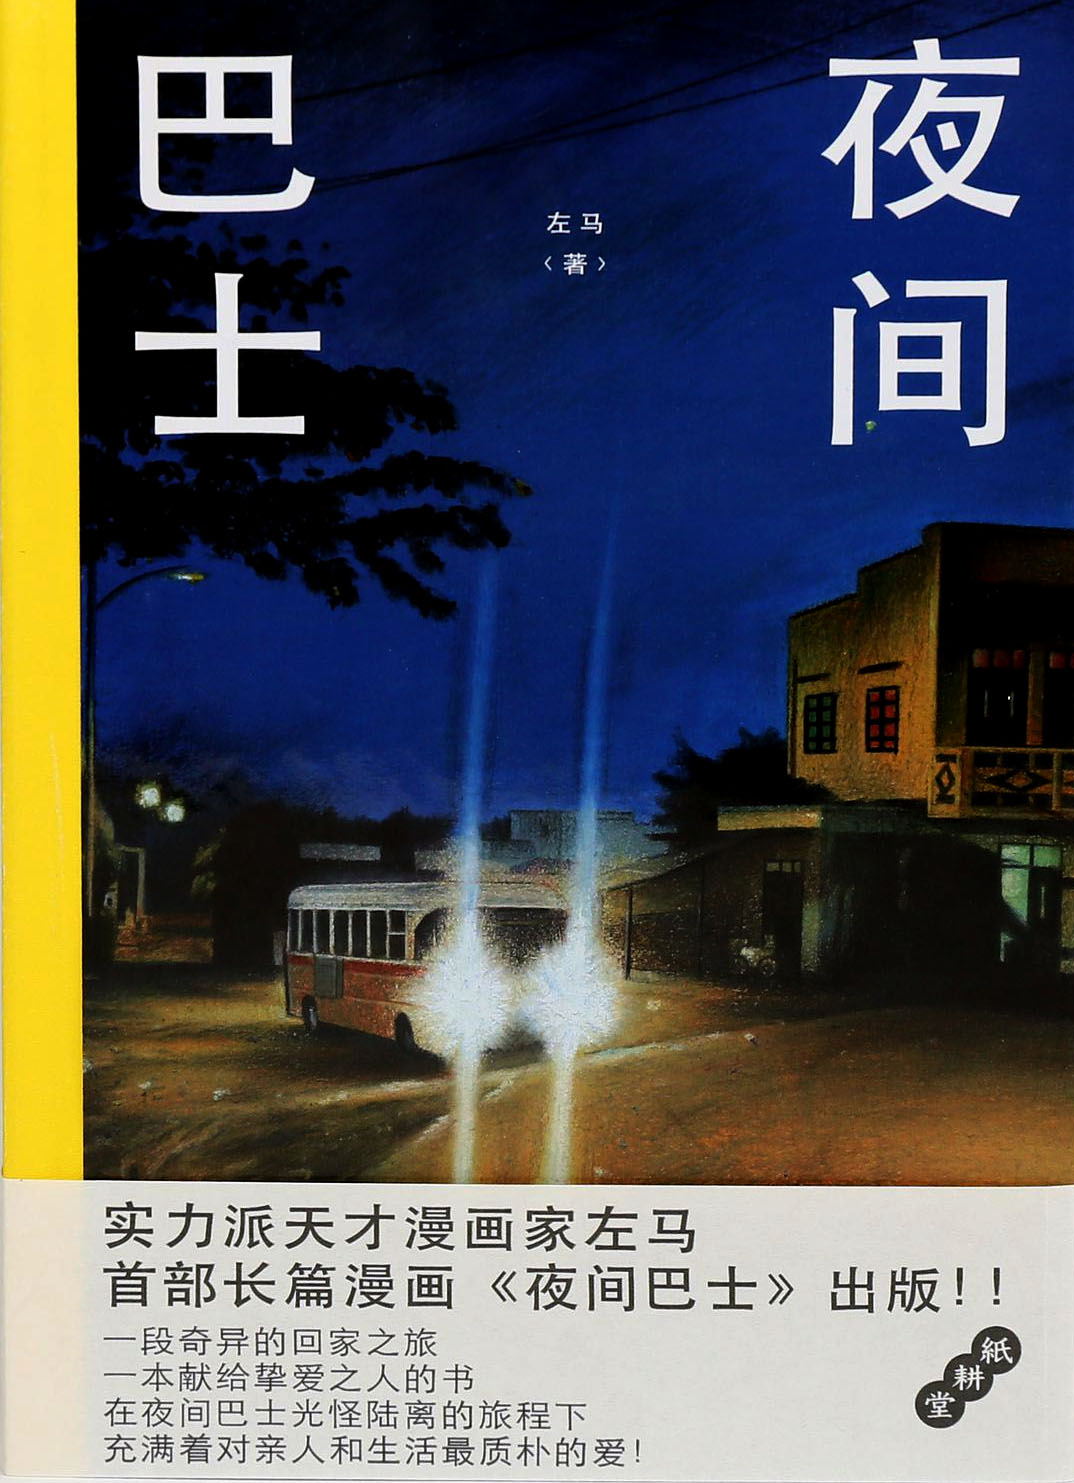 Book cover showing a bus with bright headlights in a dark blue night, with the Chinese characters for Night Bus on the top left and right corners